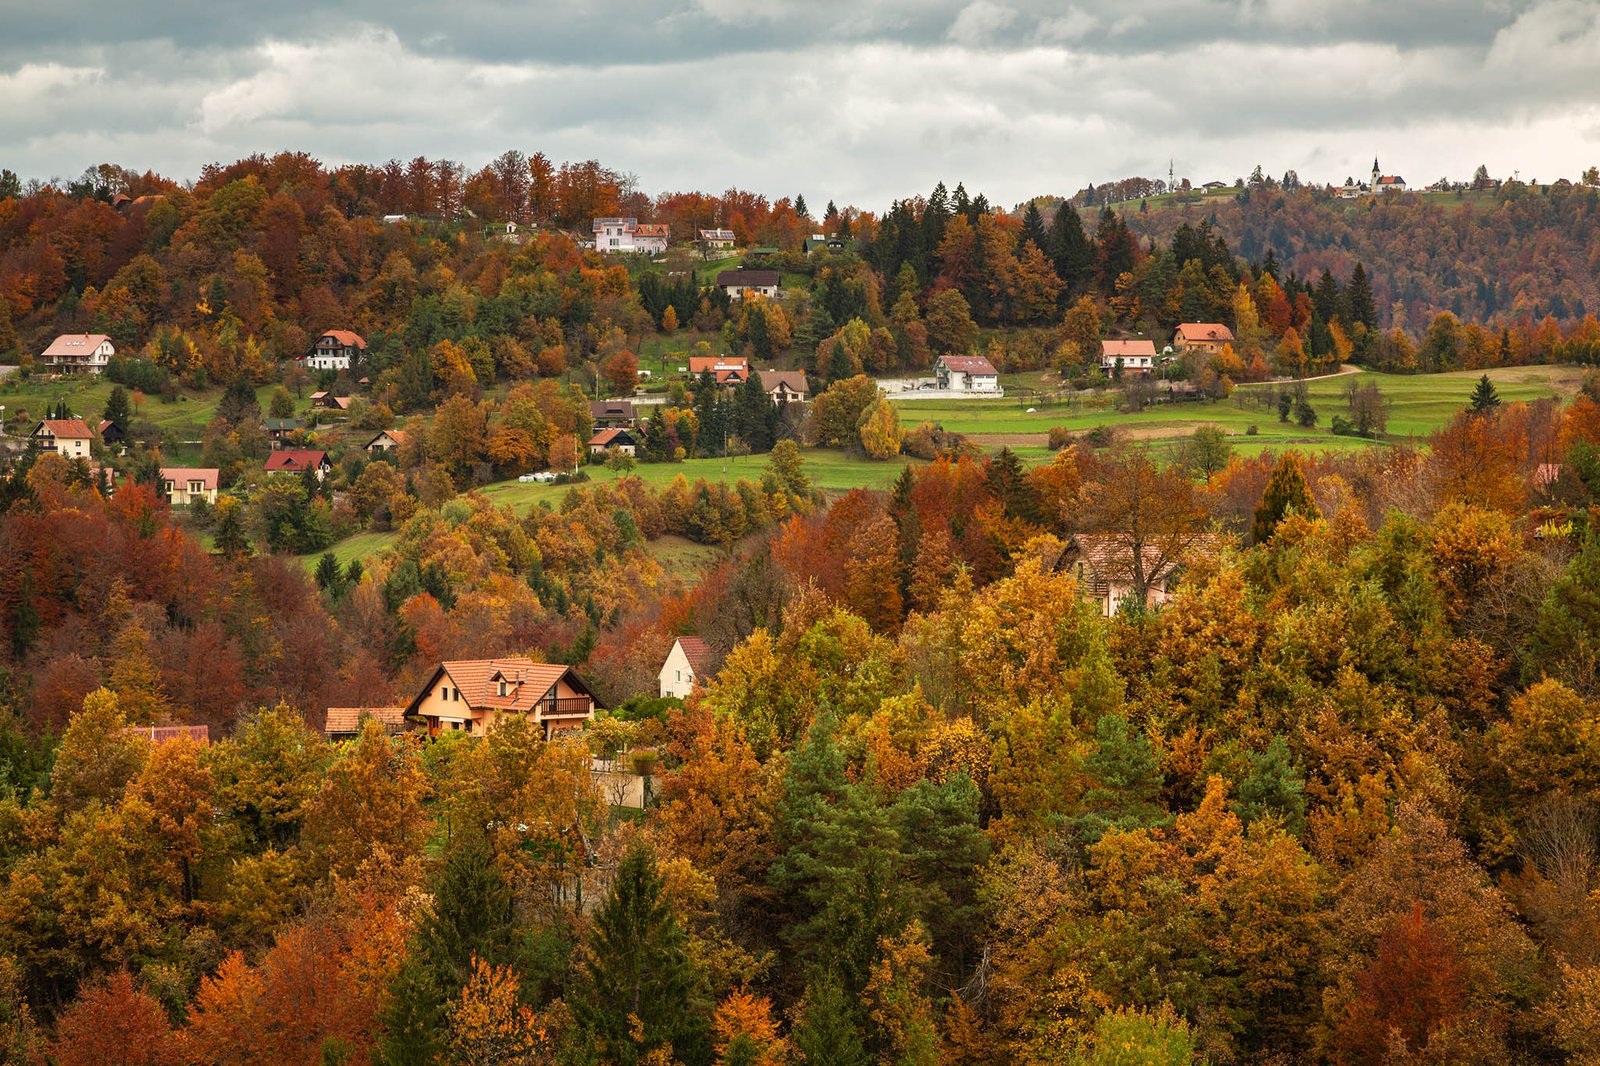 Autumn colours. View across the village of Volavlje to the church of Saint Nicholas in Jance, Slovenia. This is the eastern part of the Ljubljana Municipality.